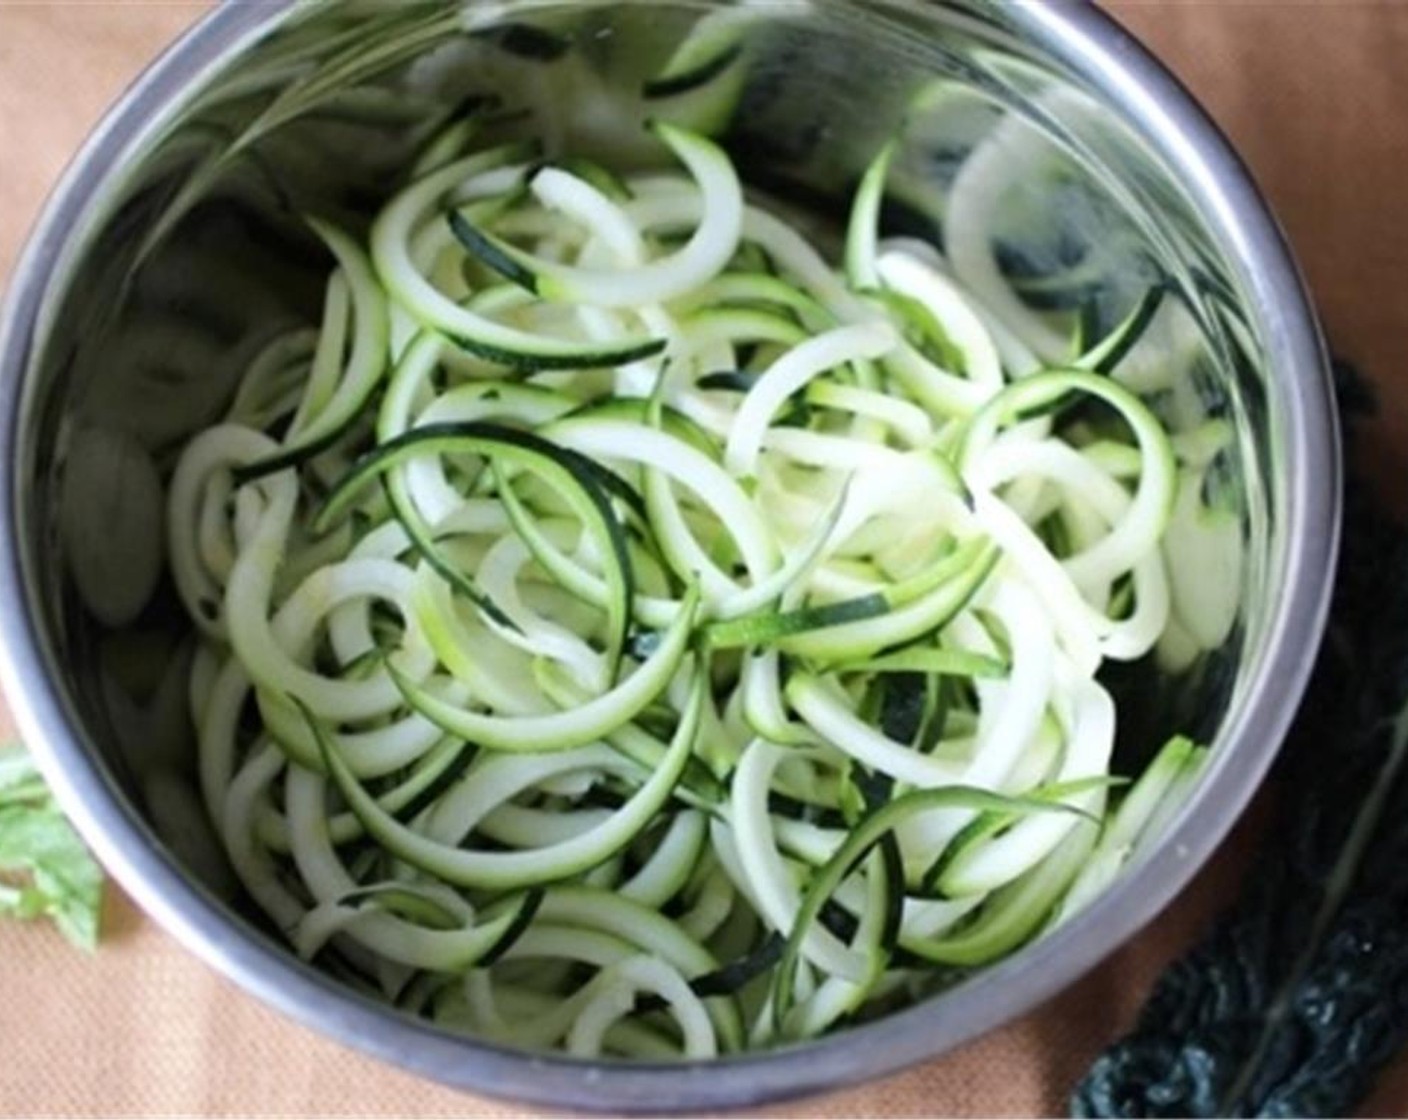 step 1 Spiralize or julienne the Zucchini (2). Add a small amount of Salt (to taste) and let them sit in a colander while you make the pesto. This will help them “sweat” a little and keep the pesto from turning runny after you dress the zucchini with it.